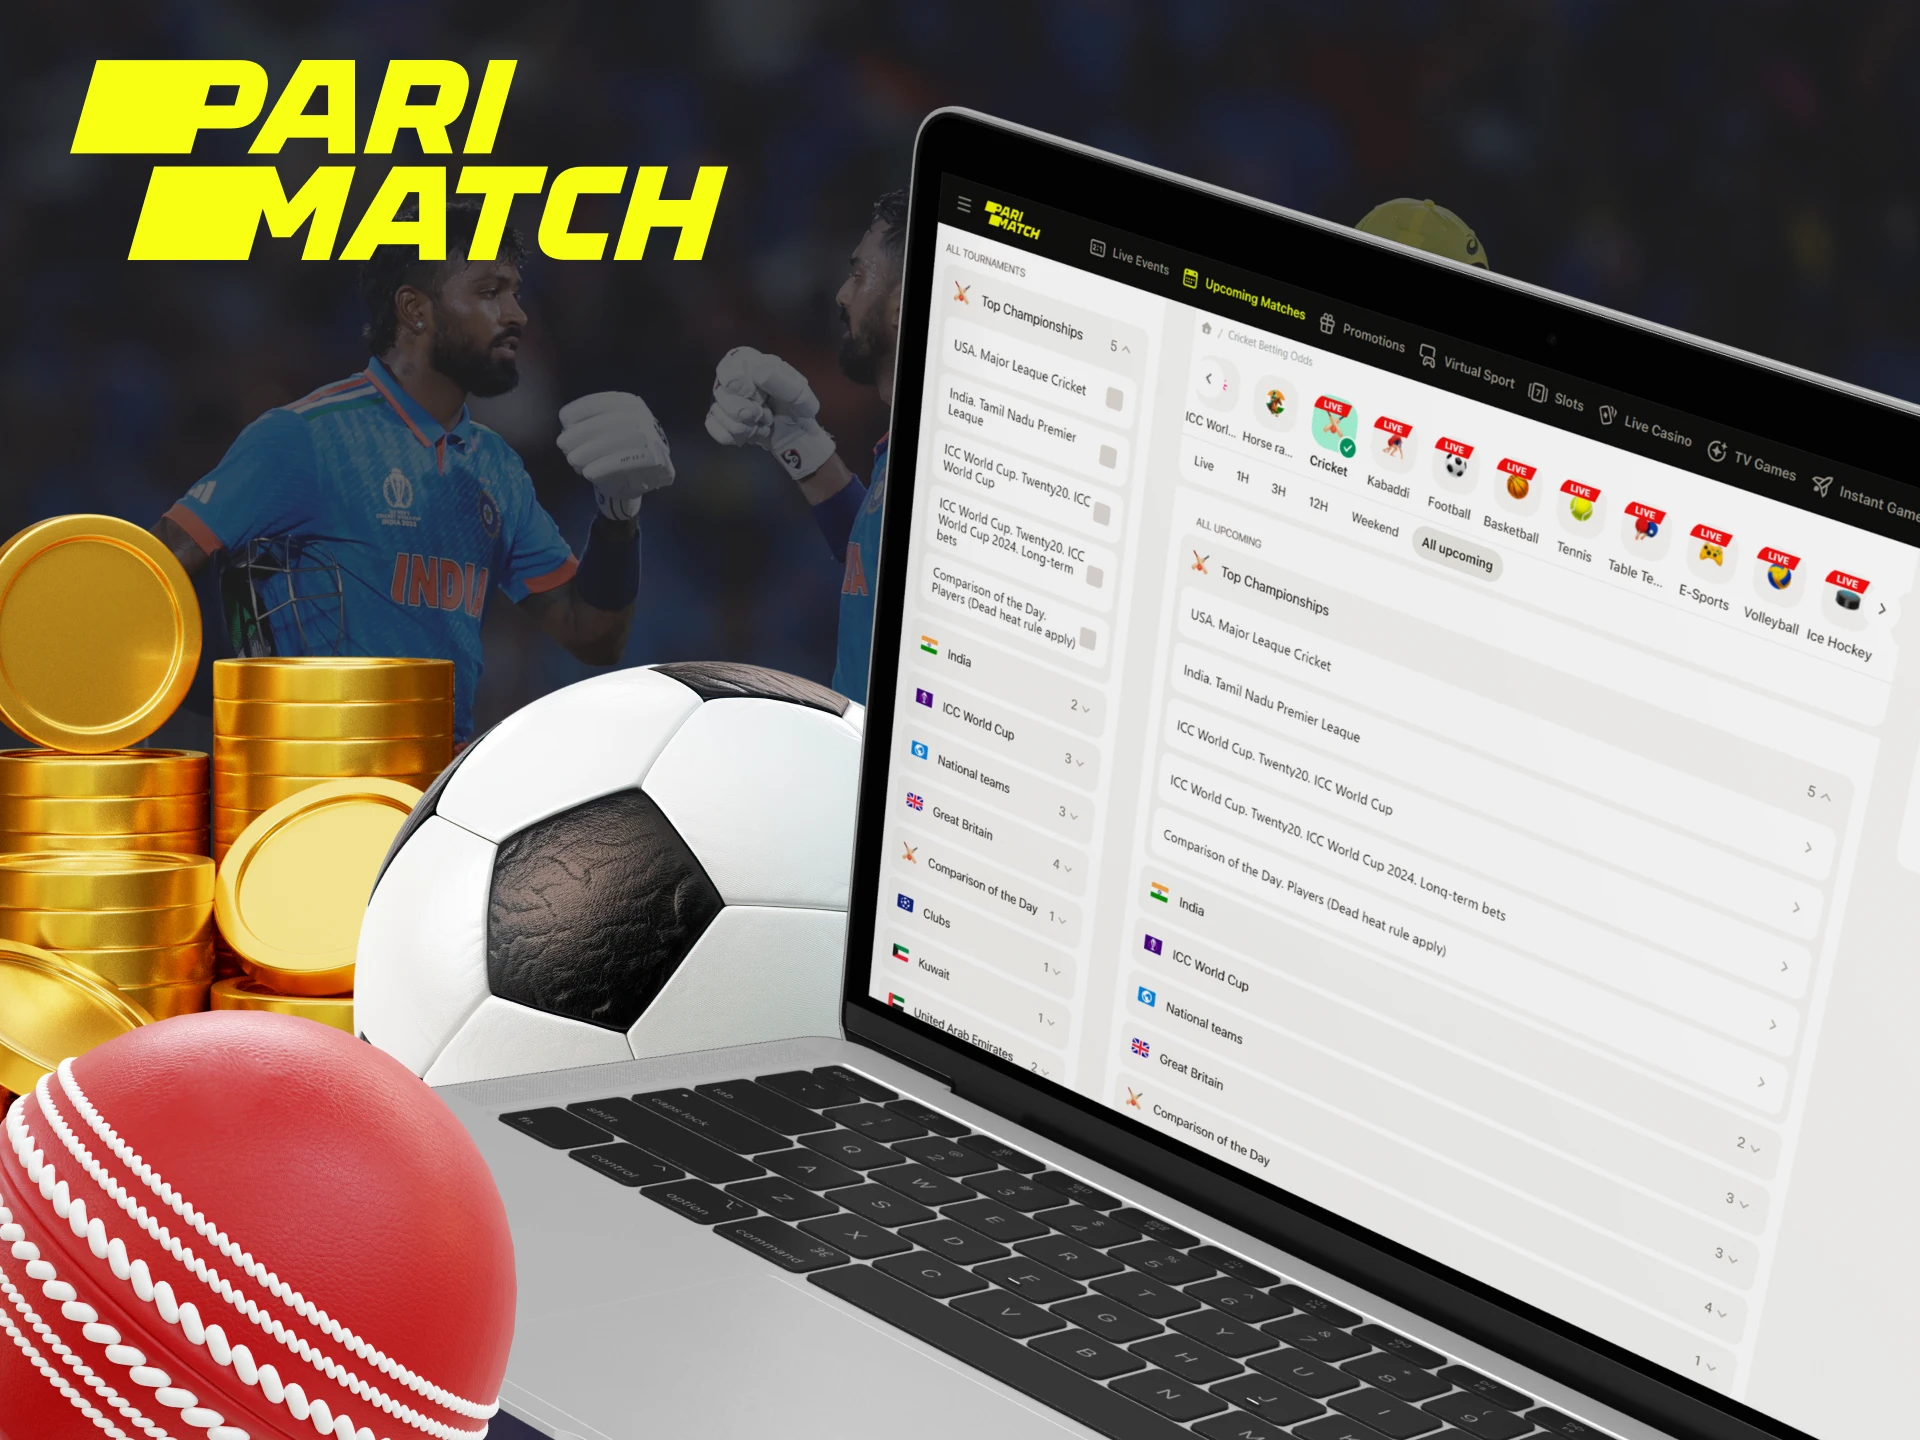 If you've already created a Parimatch account, try placing a sports bet by following these steps.